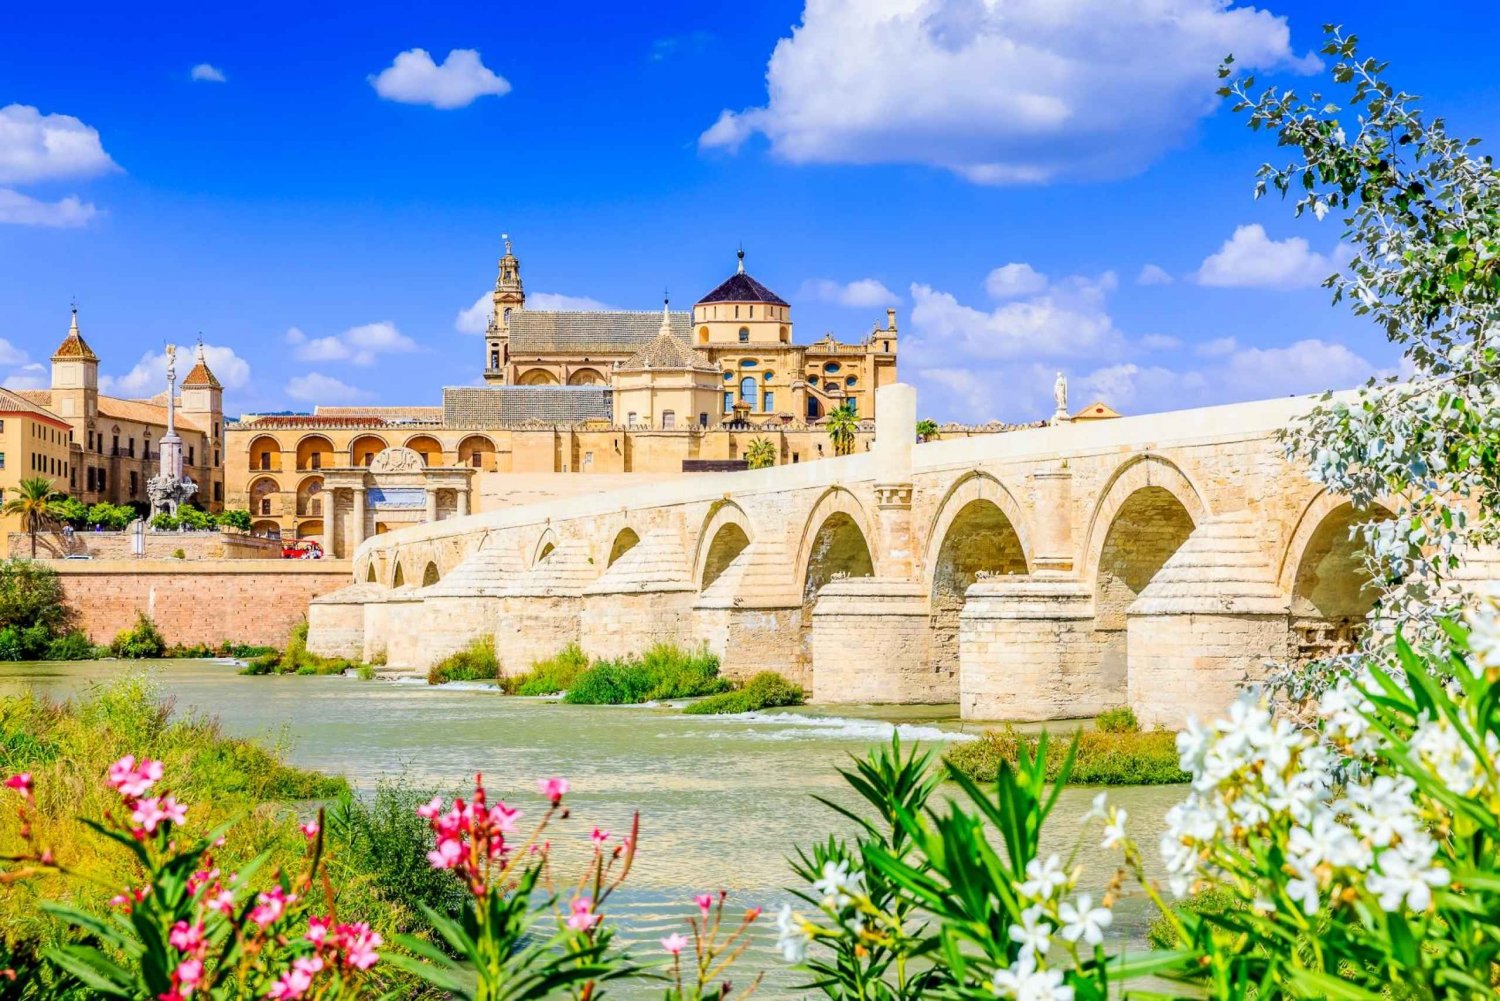 Ab Barcelona: 5 Tage Andalusien und Toledo